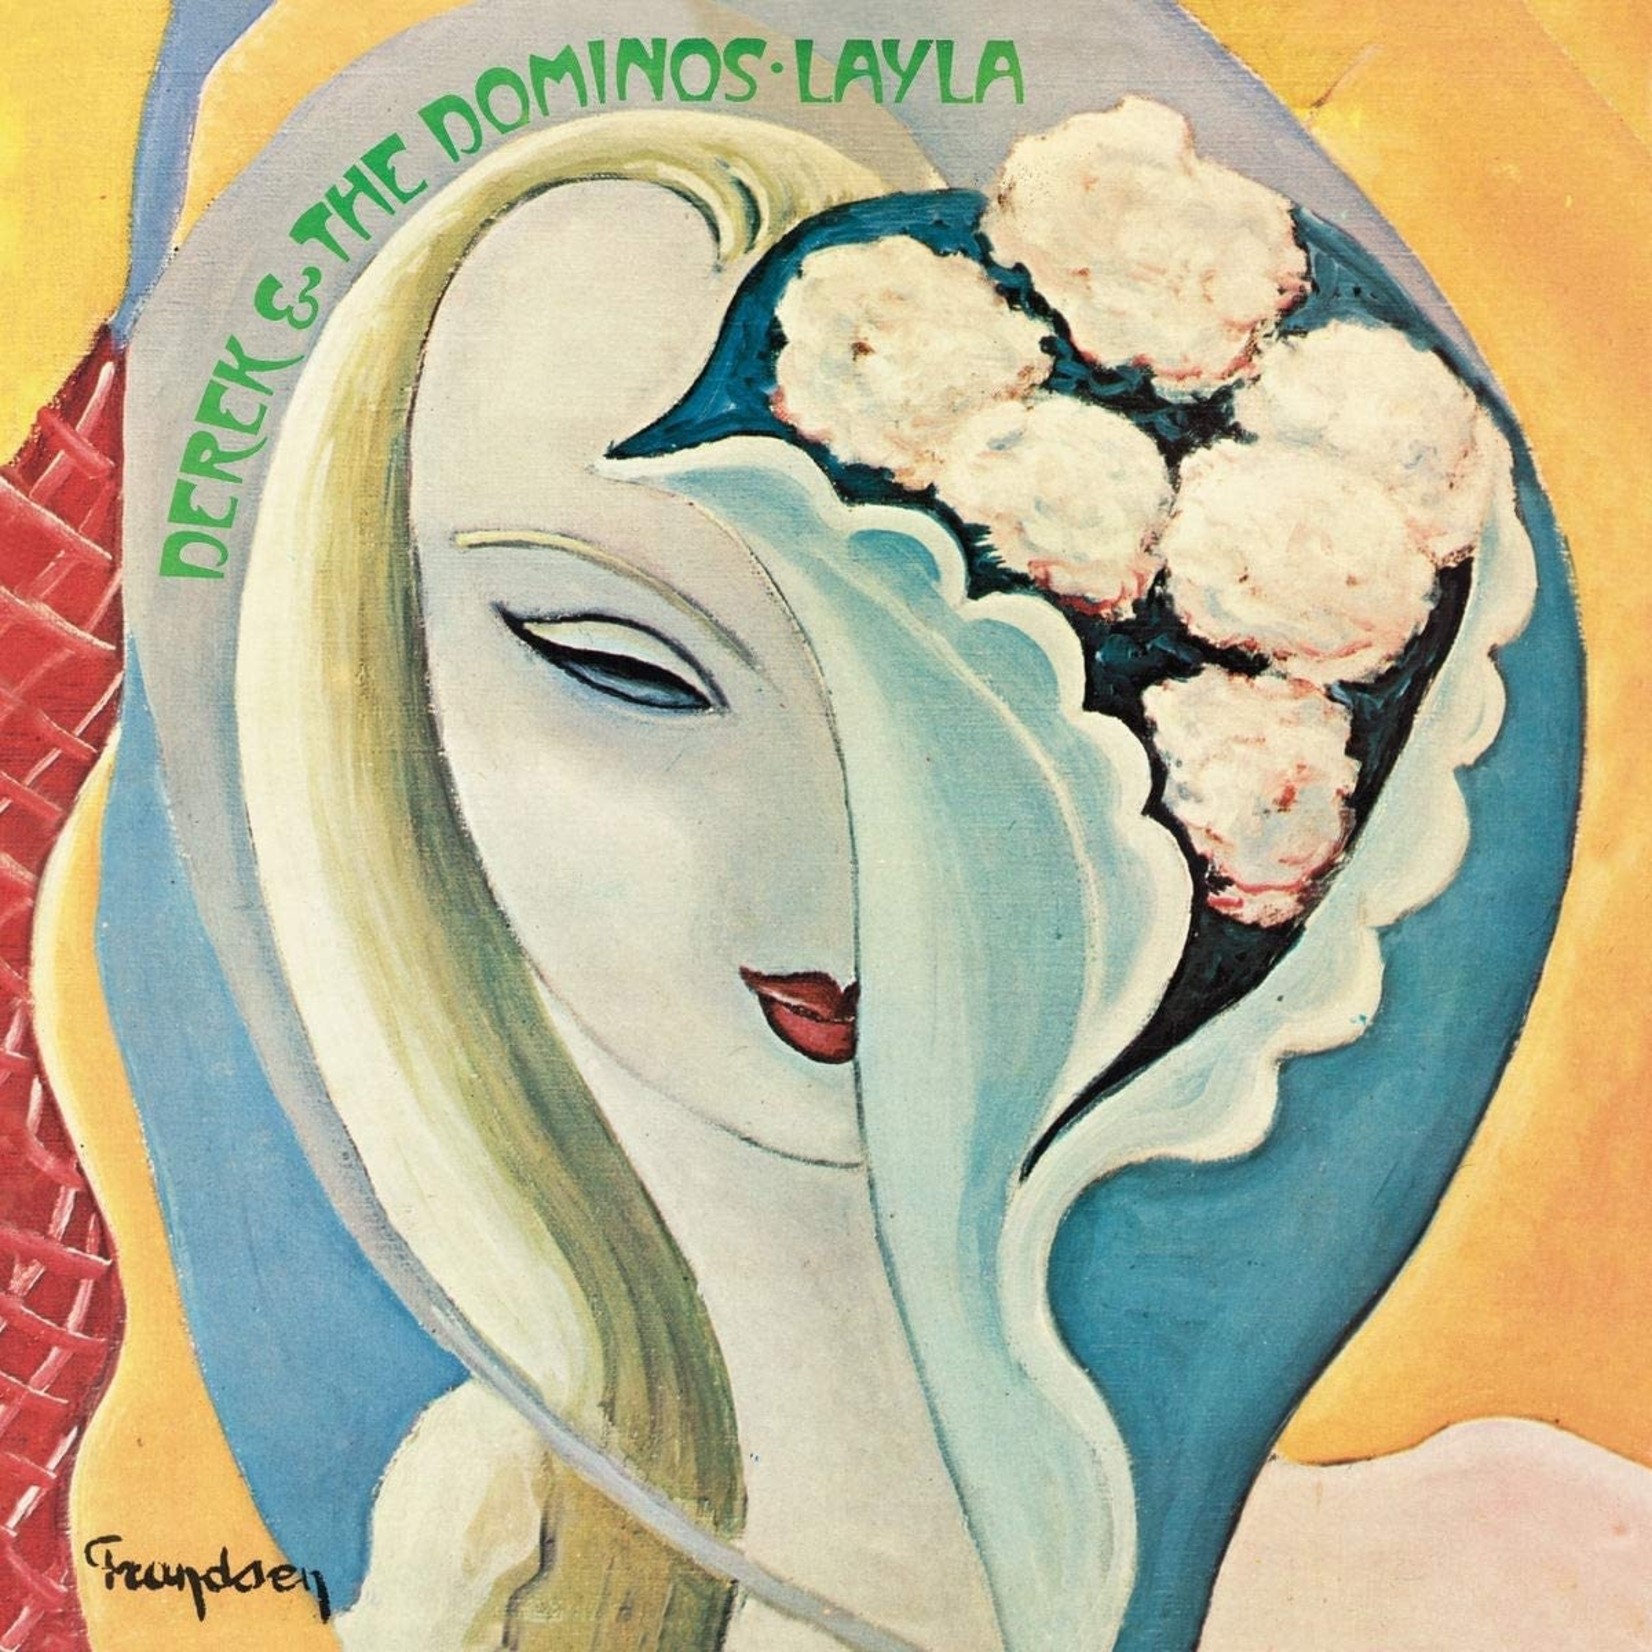 Vinyl Derek And The Dominos -Layla And Other Assorted Love Songs (50th Anniversary 4LP Half-Speed Master Vinyl Edition)